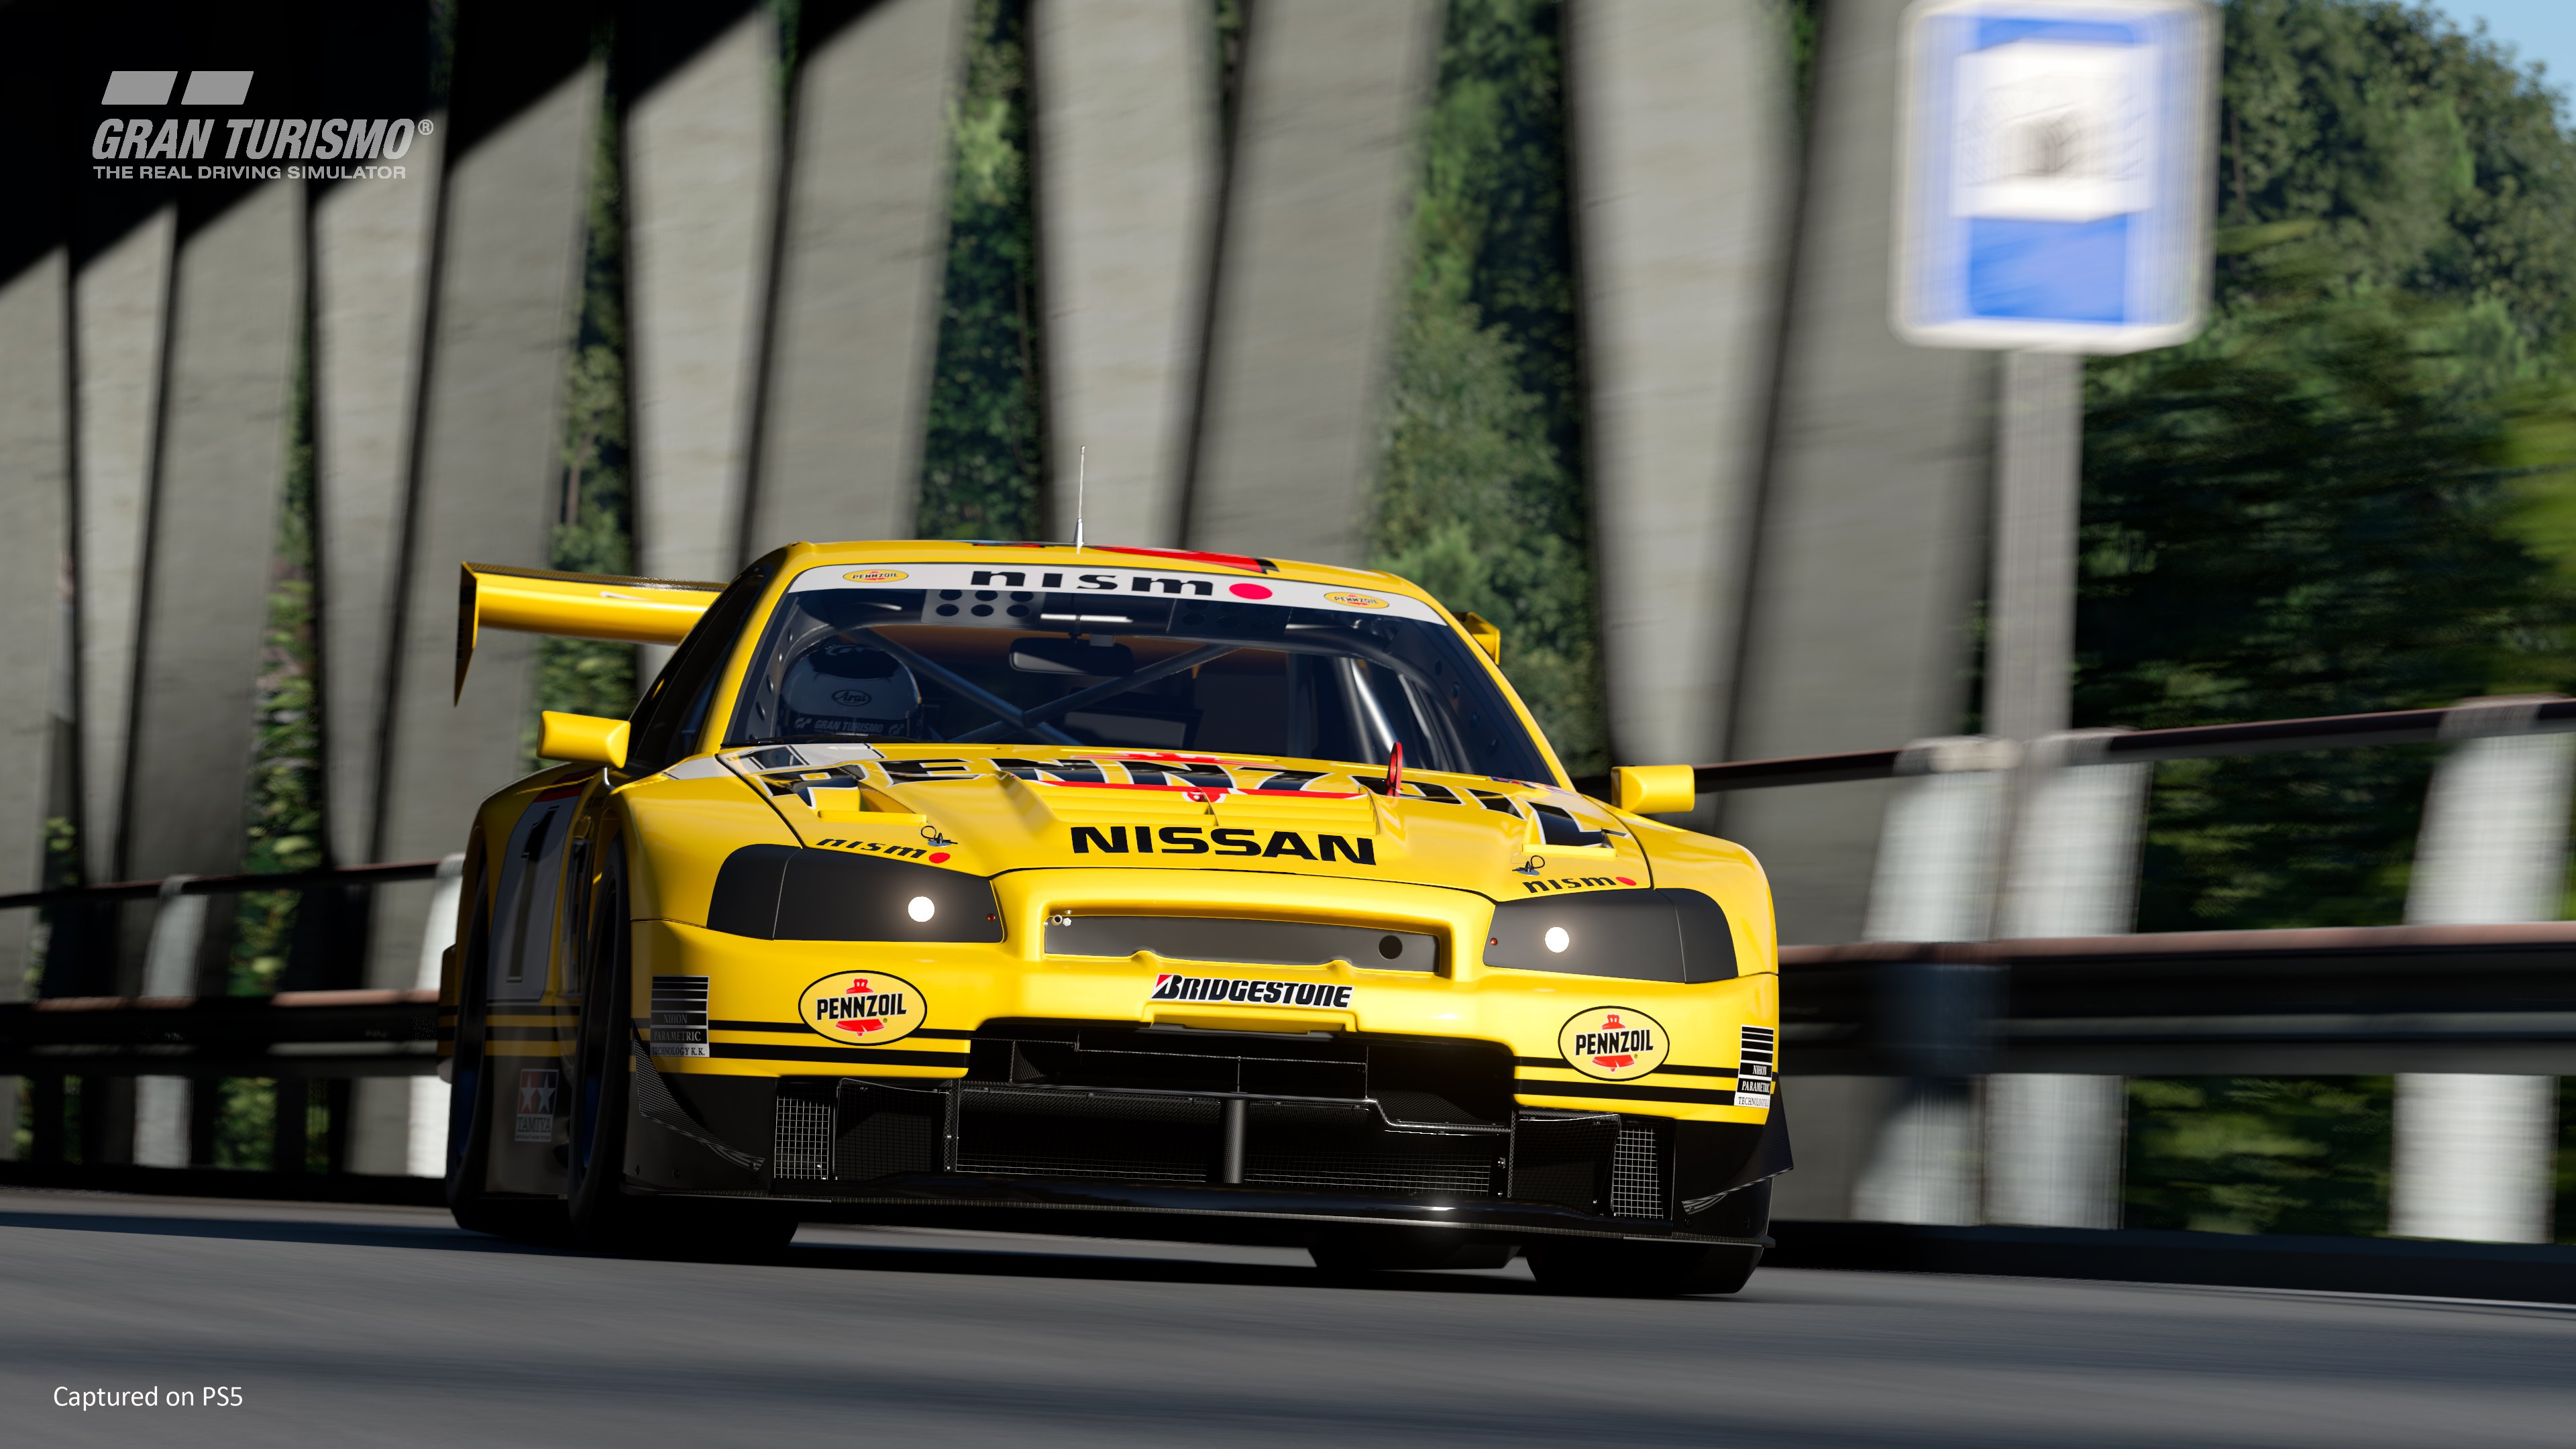 Gran Turismo 7 Might Have Been Leaked by World's Leading Racing